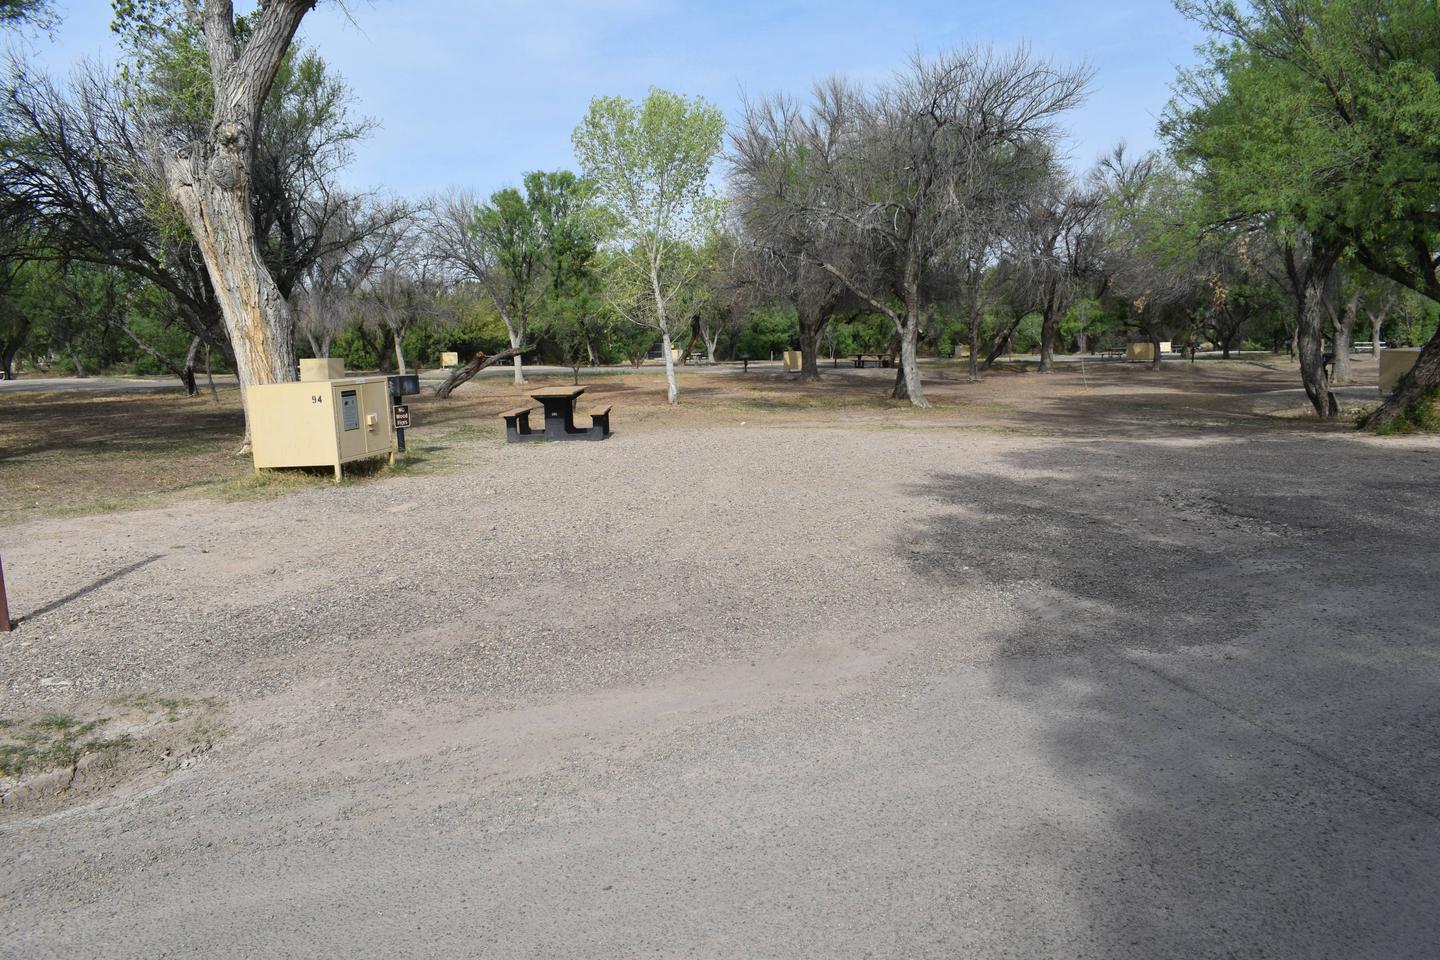 Rio Grande Village #94Spacious parking and camping area for site 94